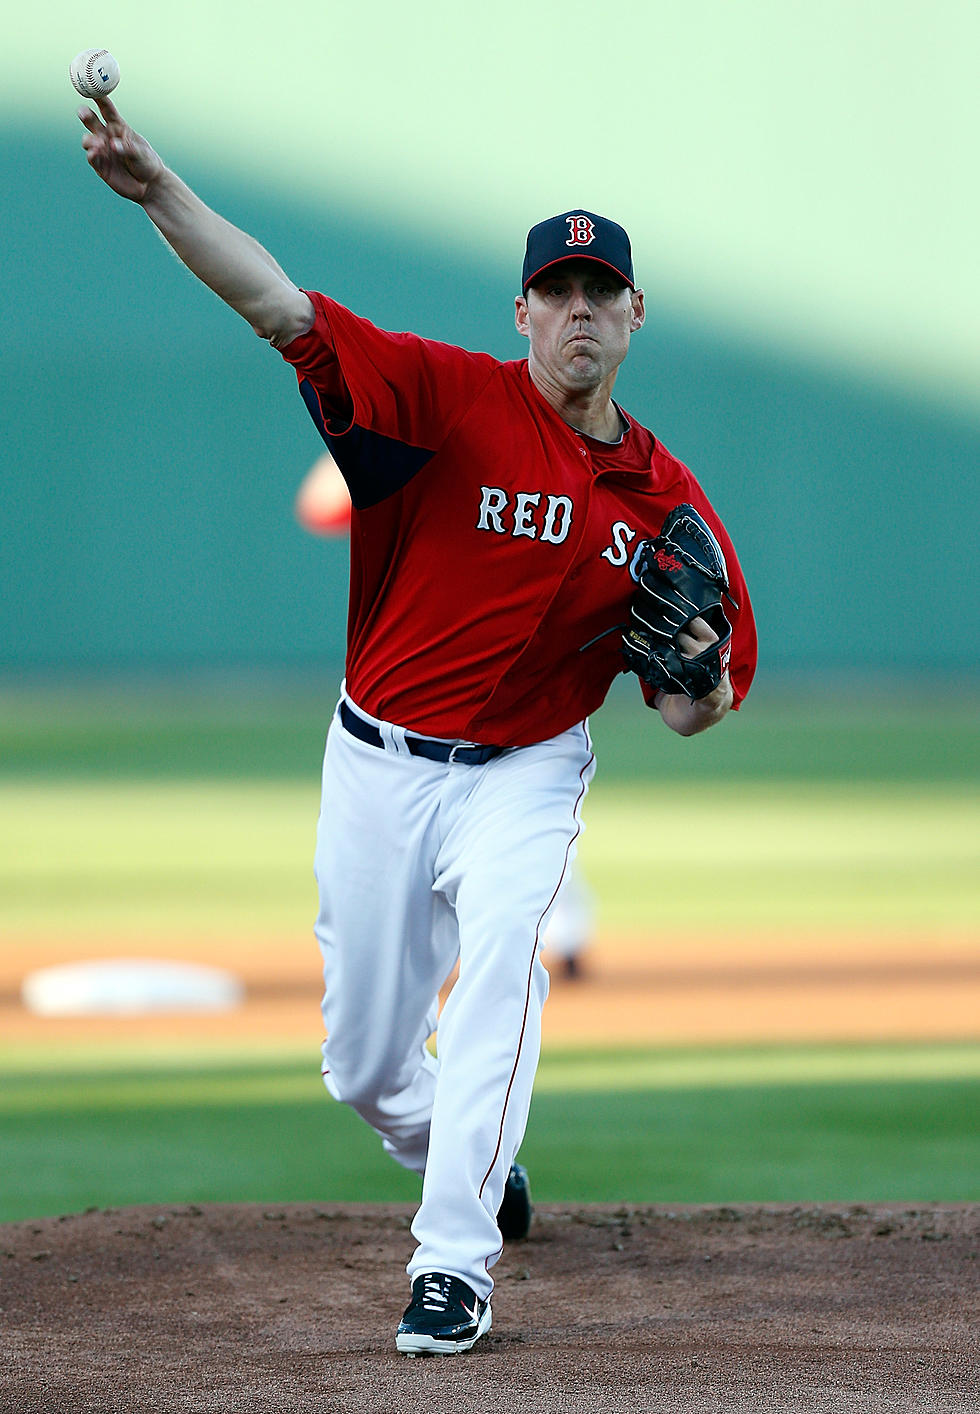 The Awesomly Funny Pitching Faces of the Red Sox [PHOTOS]